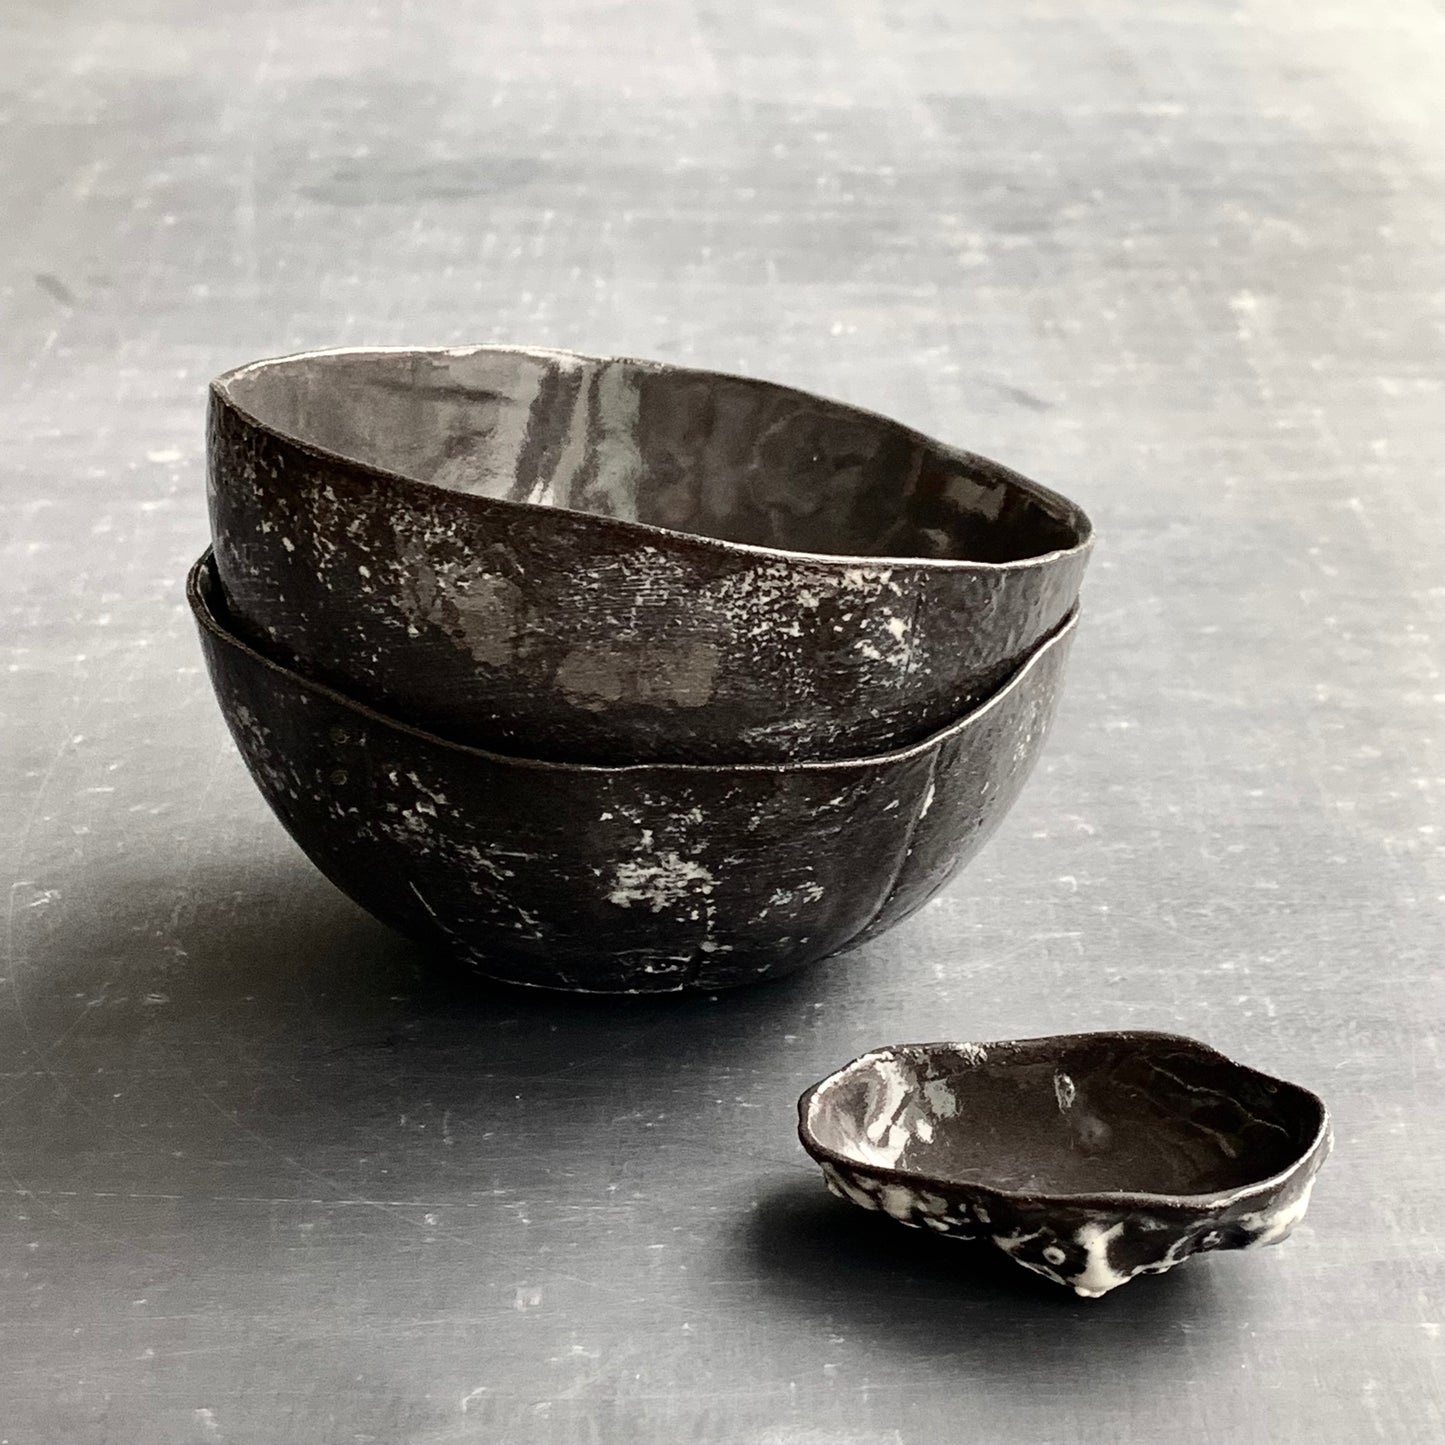 Unique handmade black ceramic bowl from the Amazon collection. This medium bowl made of black clay enriches your table setting with a mysterious magical feel or will surprise someone as a personal ceramic gift. A one of a kind signature piece of tableware with a unique design and white porcelain slib